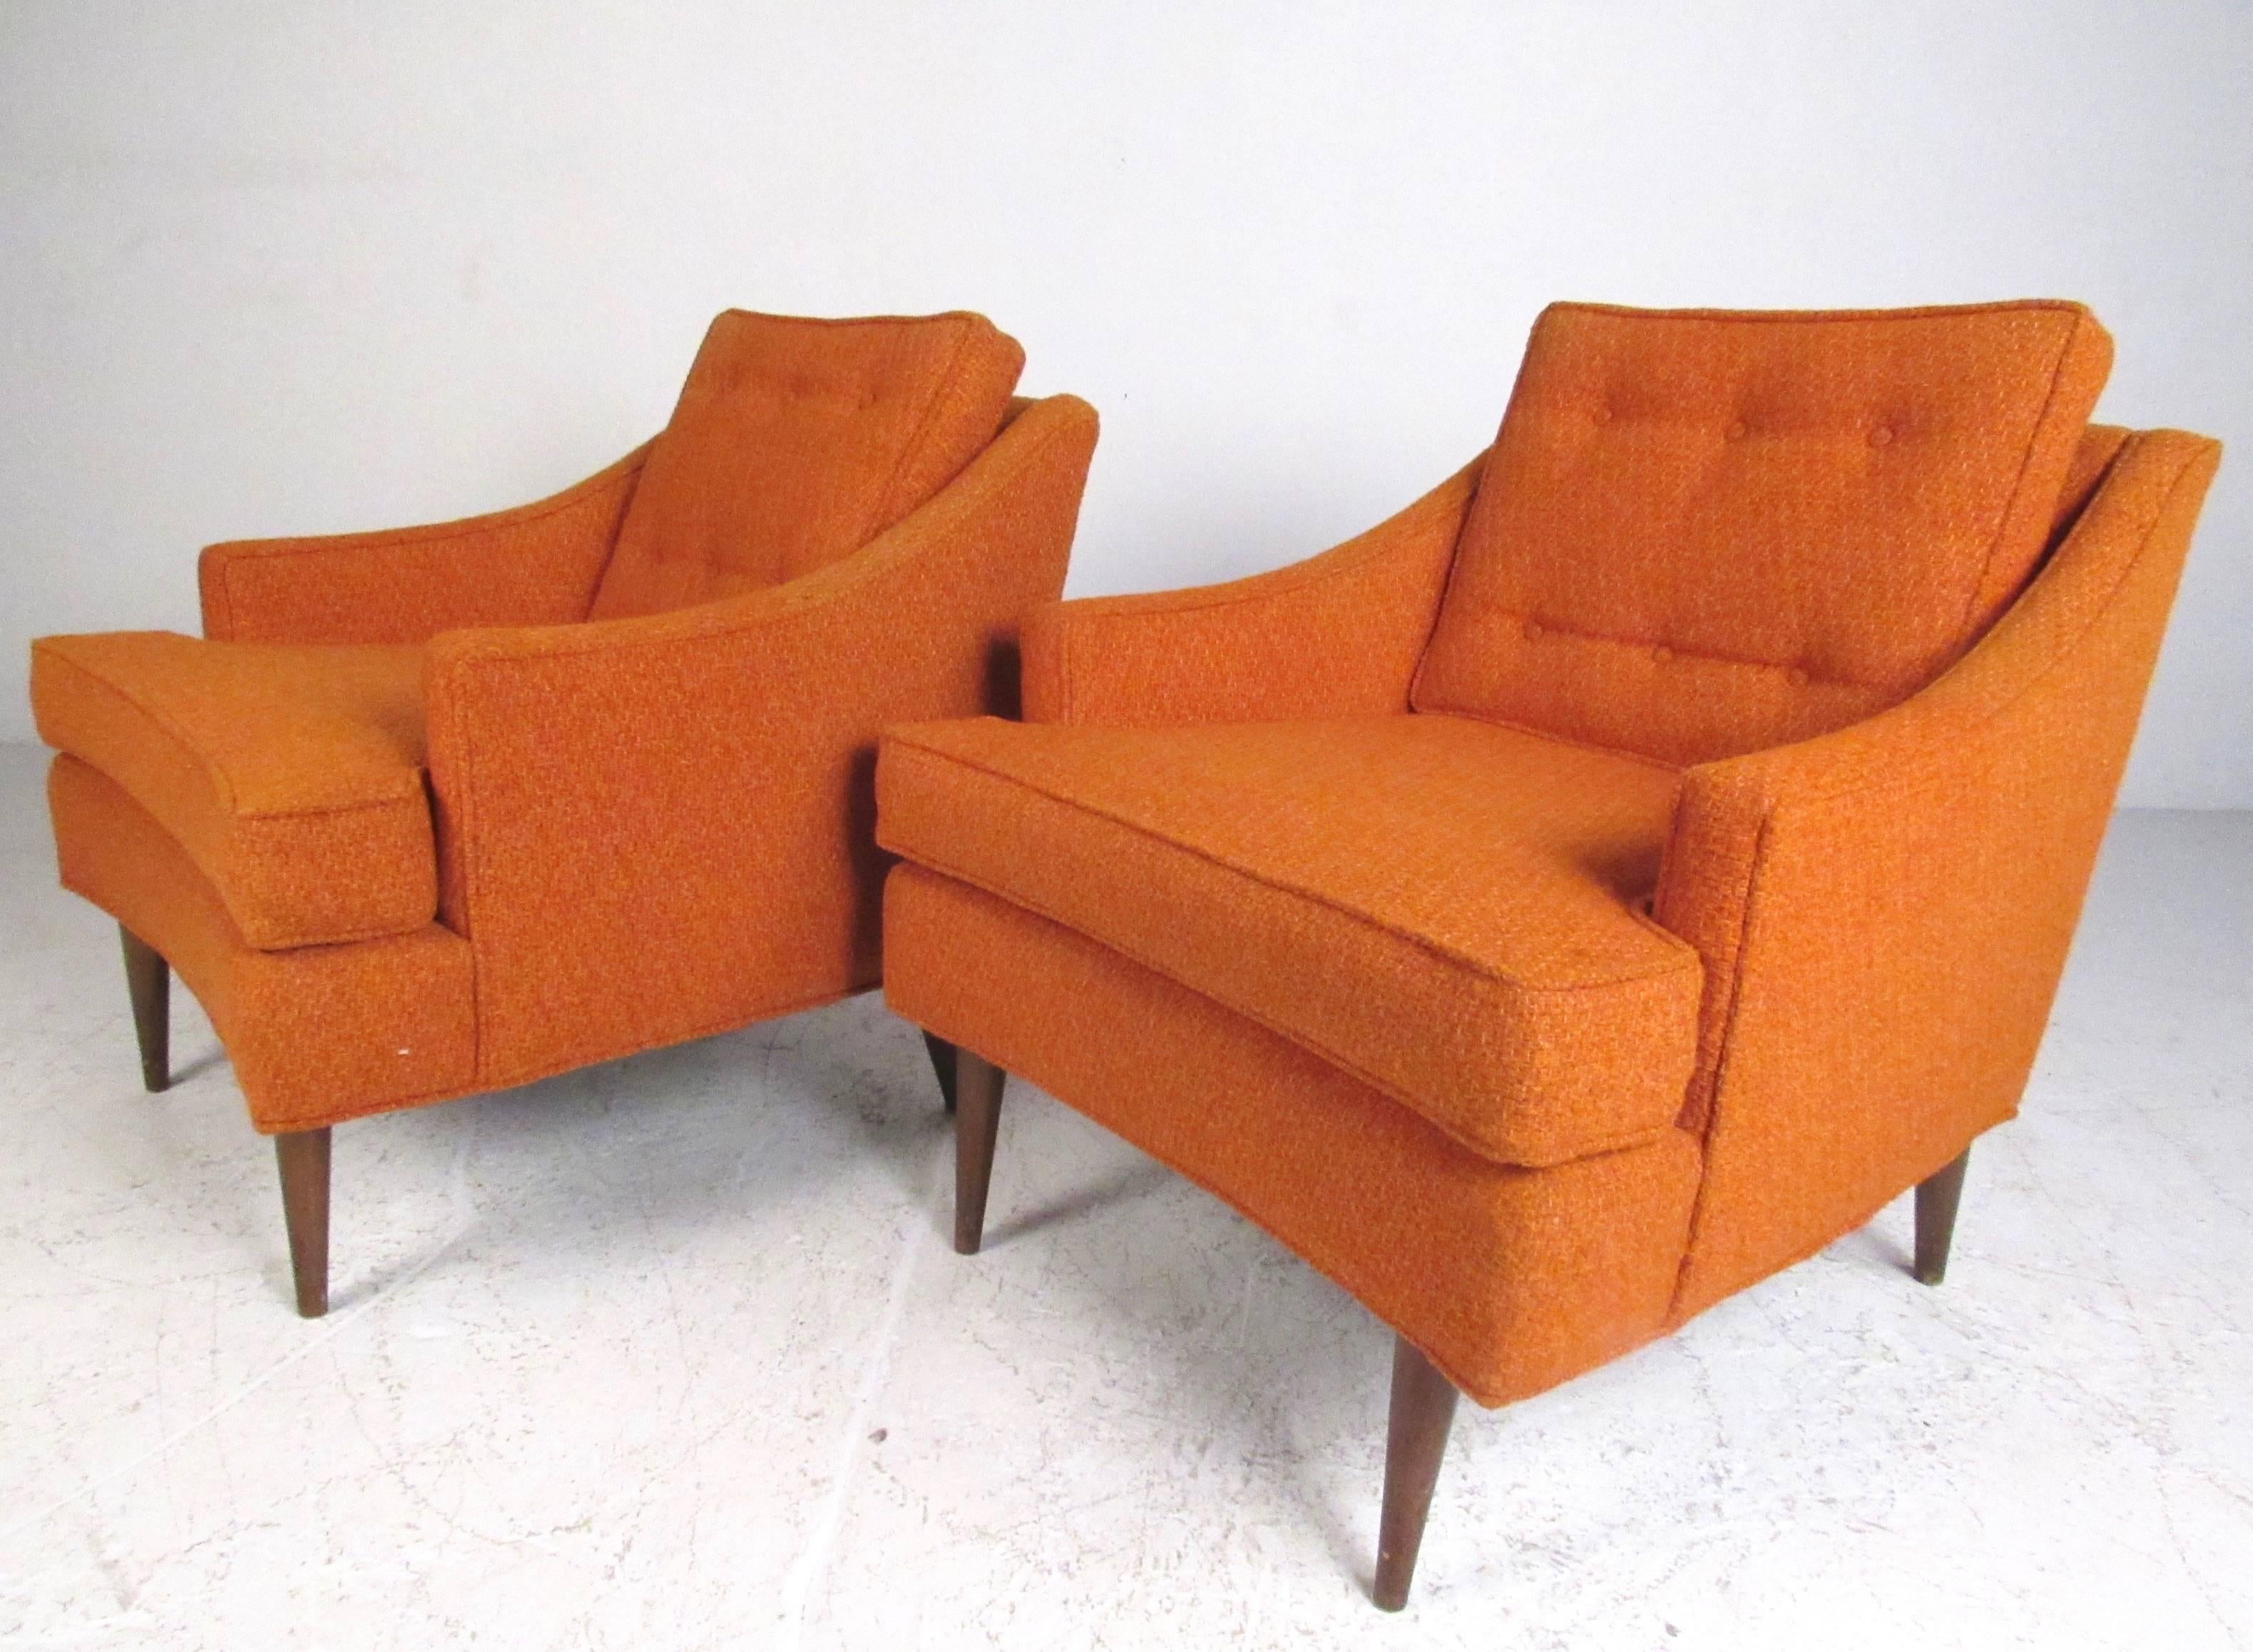 This matching pair of vintage lounge chairs feature comfortable upholstered frames with tapered walnut legs and tufted cushions. Sleek sloped arm rests add to comfort and style of the pair. Please confirm item location (NY or NJ).